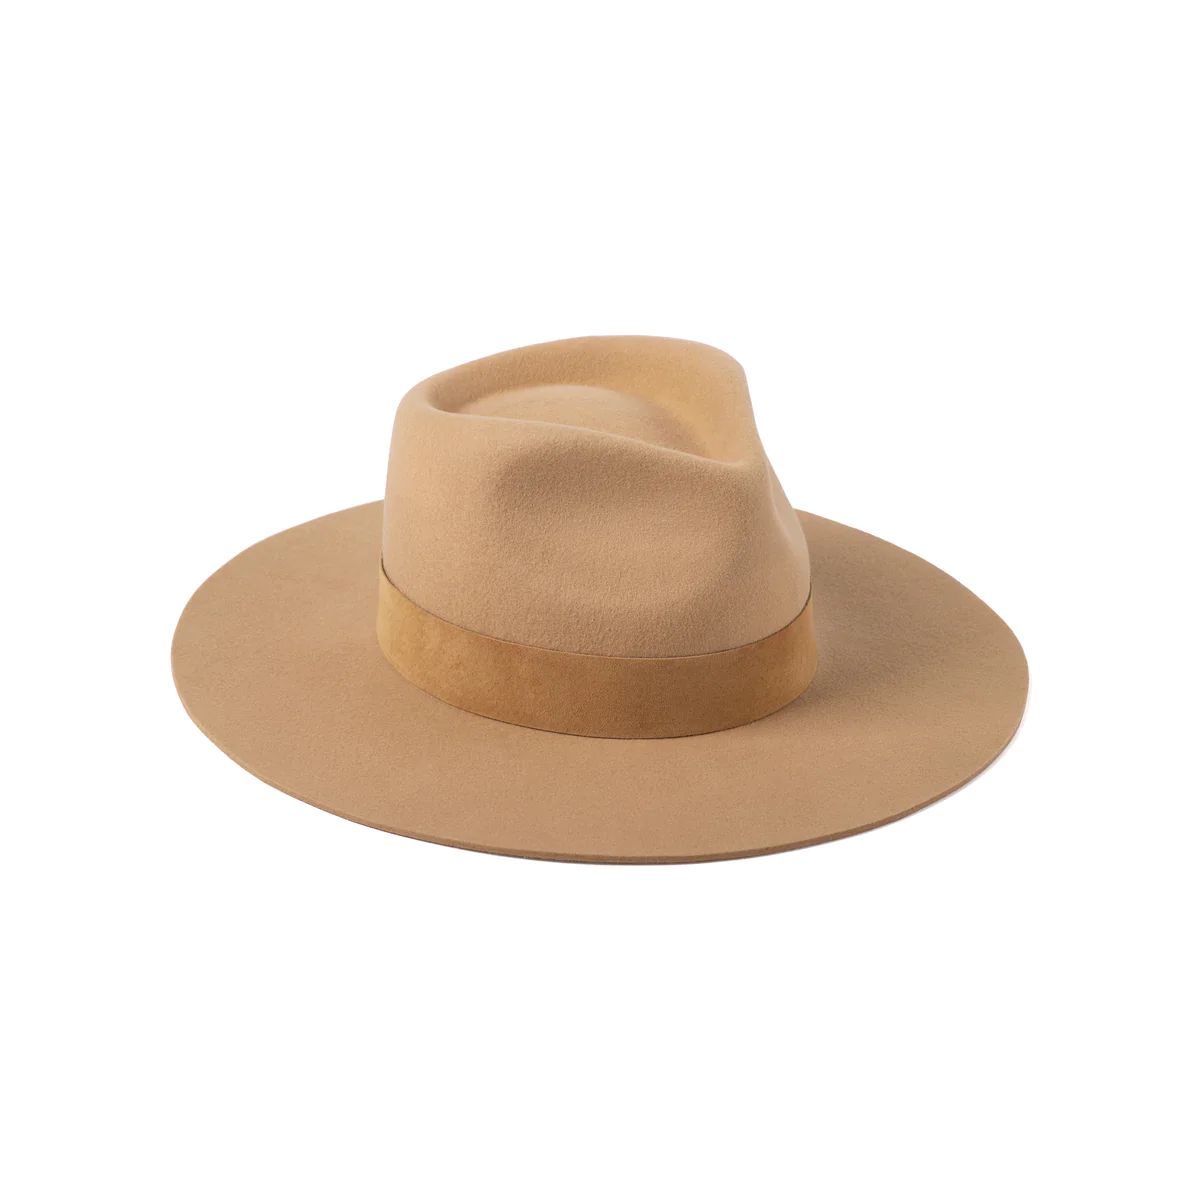 The Mirage - Wool Felt Fedora Hat in Brown | Lack of Color US | Lack of Color